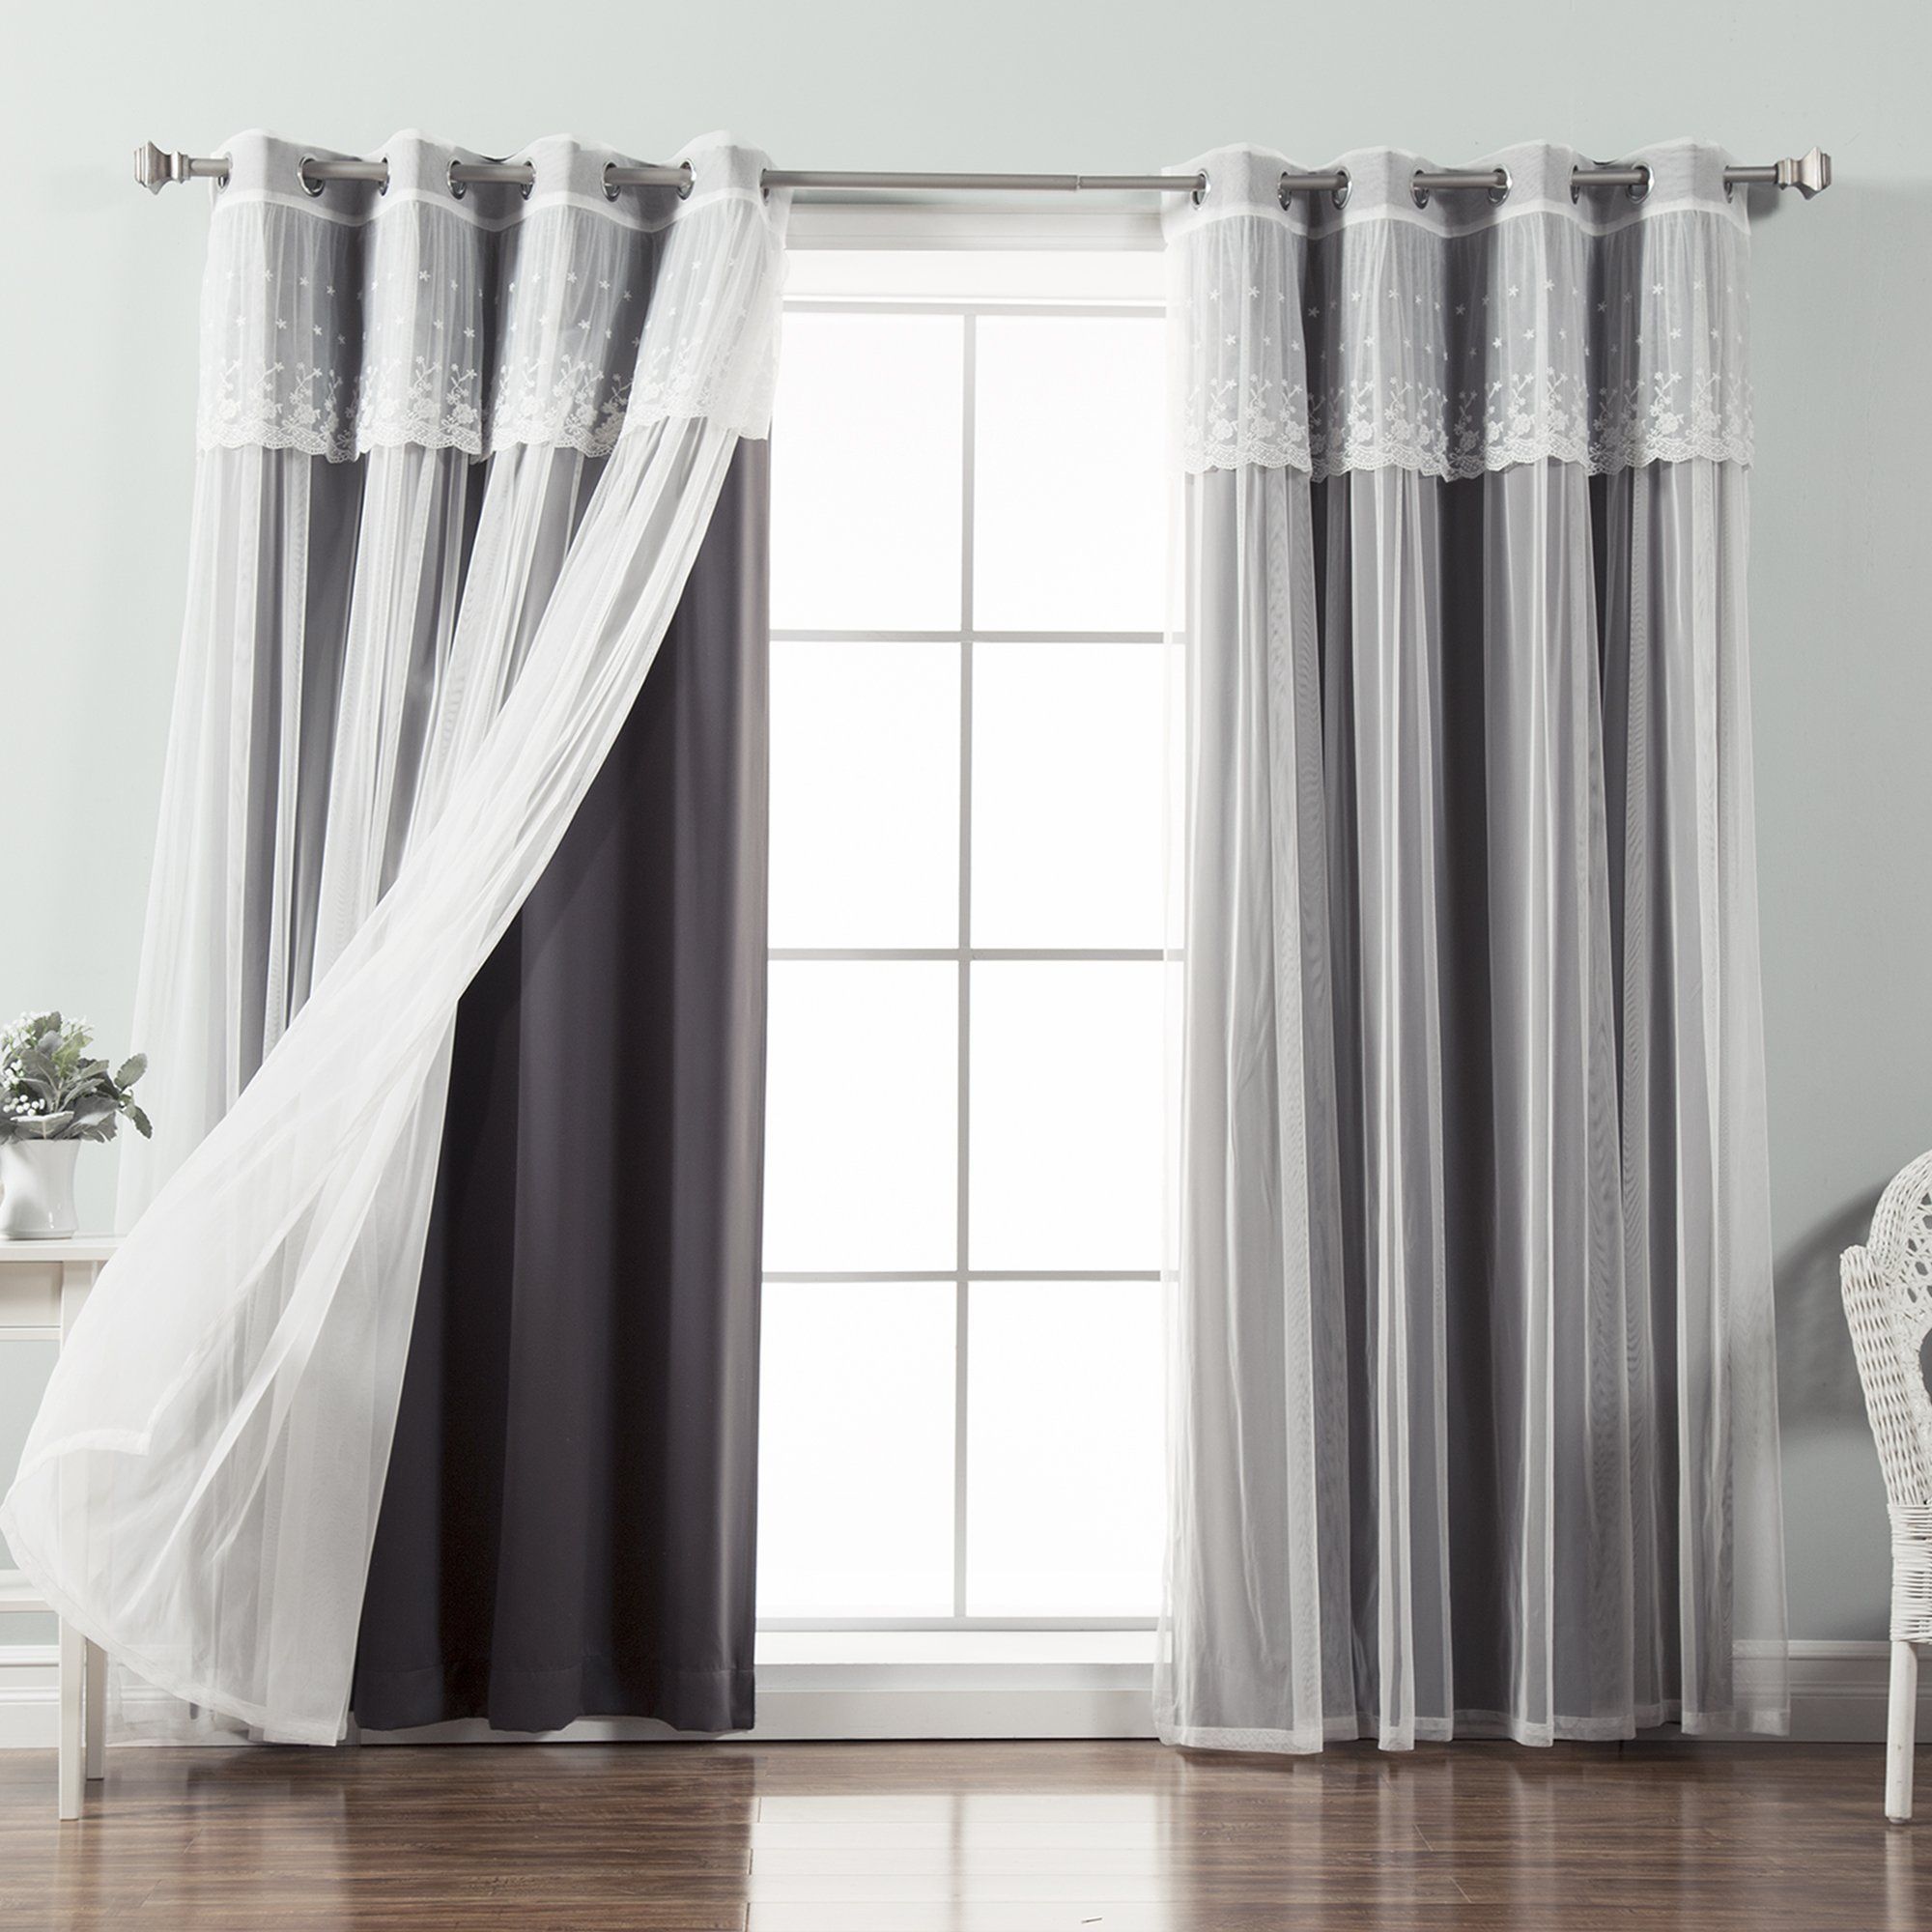 Best Home Fashion Mix And Match Tulle Sheer With Attached Throughout Tulle Sheer With Attached Valance And Blackout 4 Piece Curtain Panel Pairs (View 5 of 30)